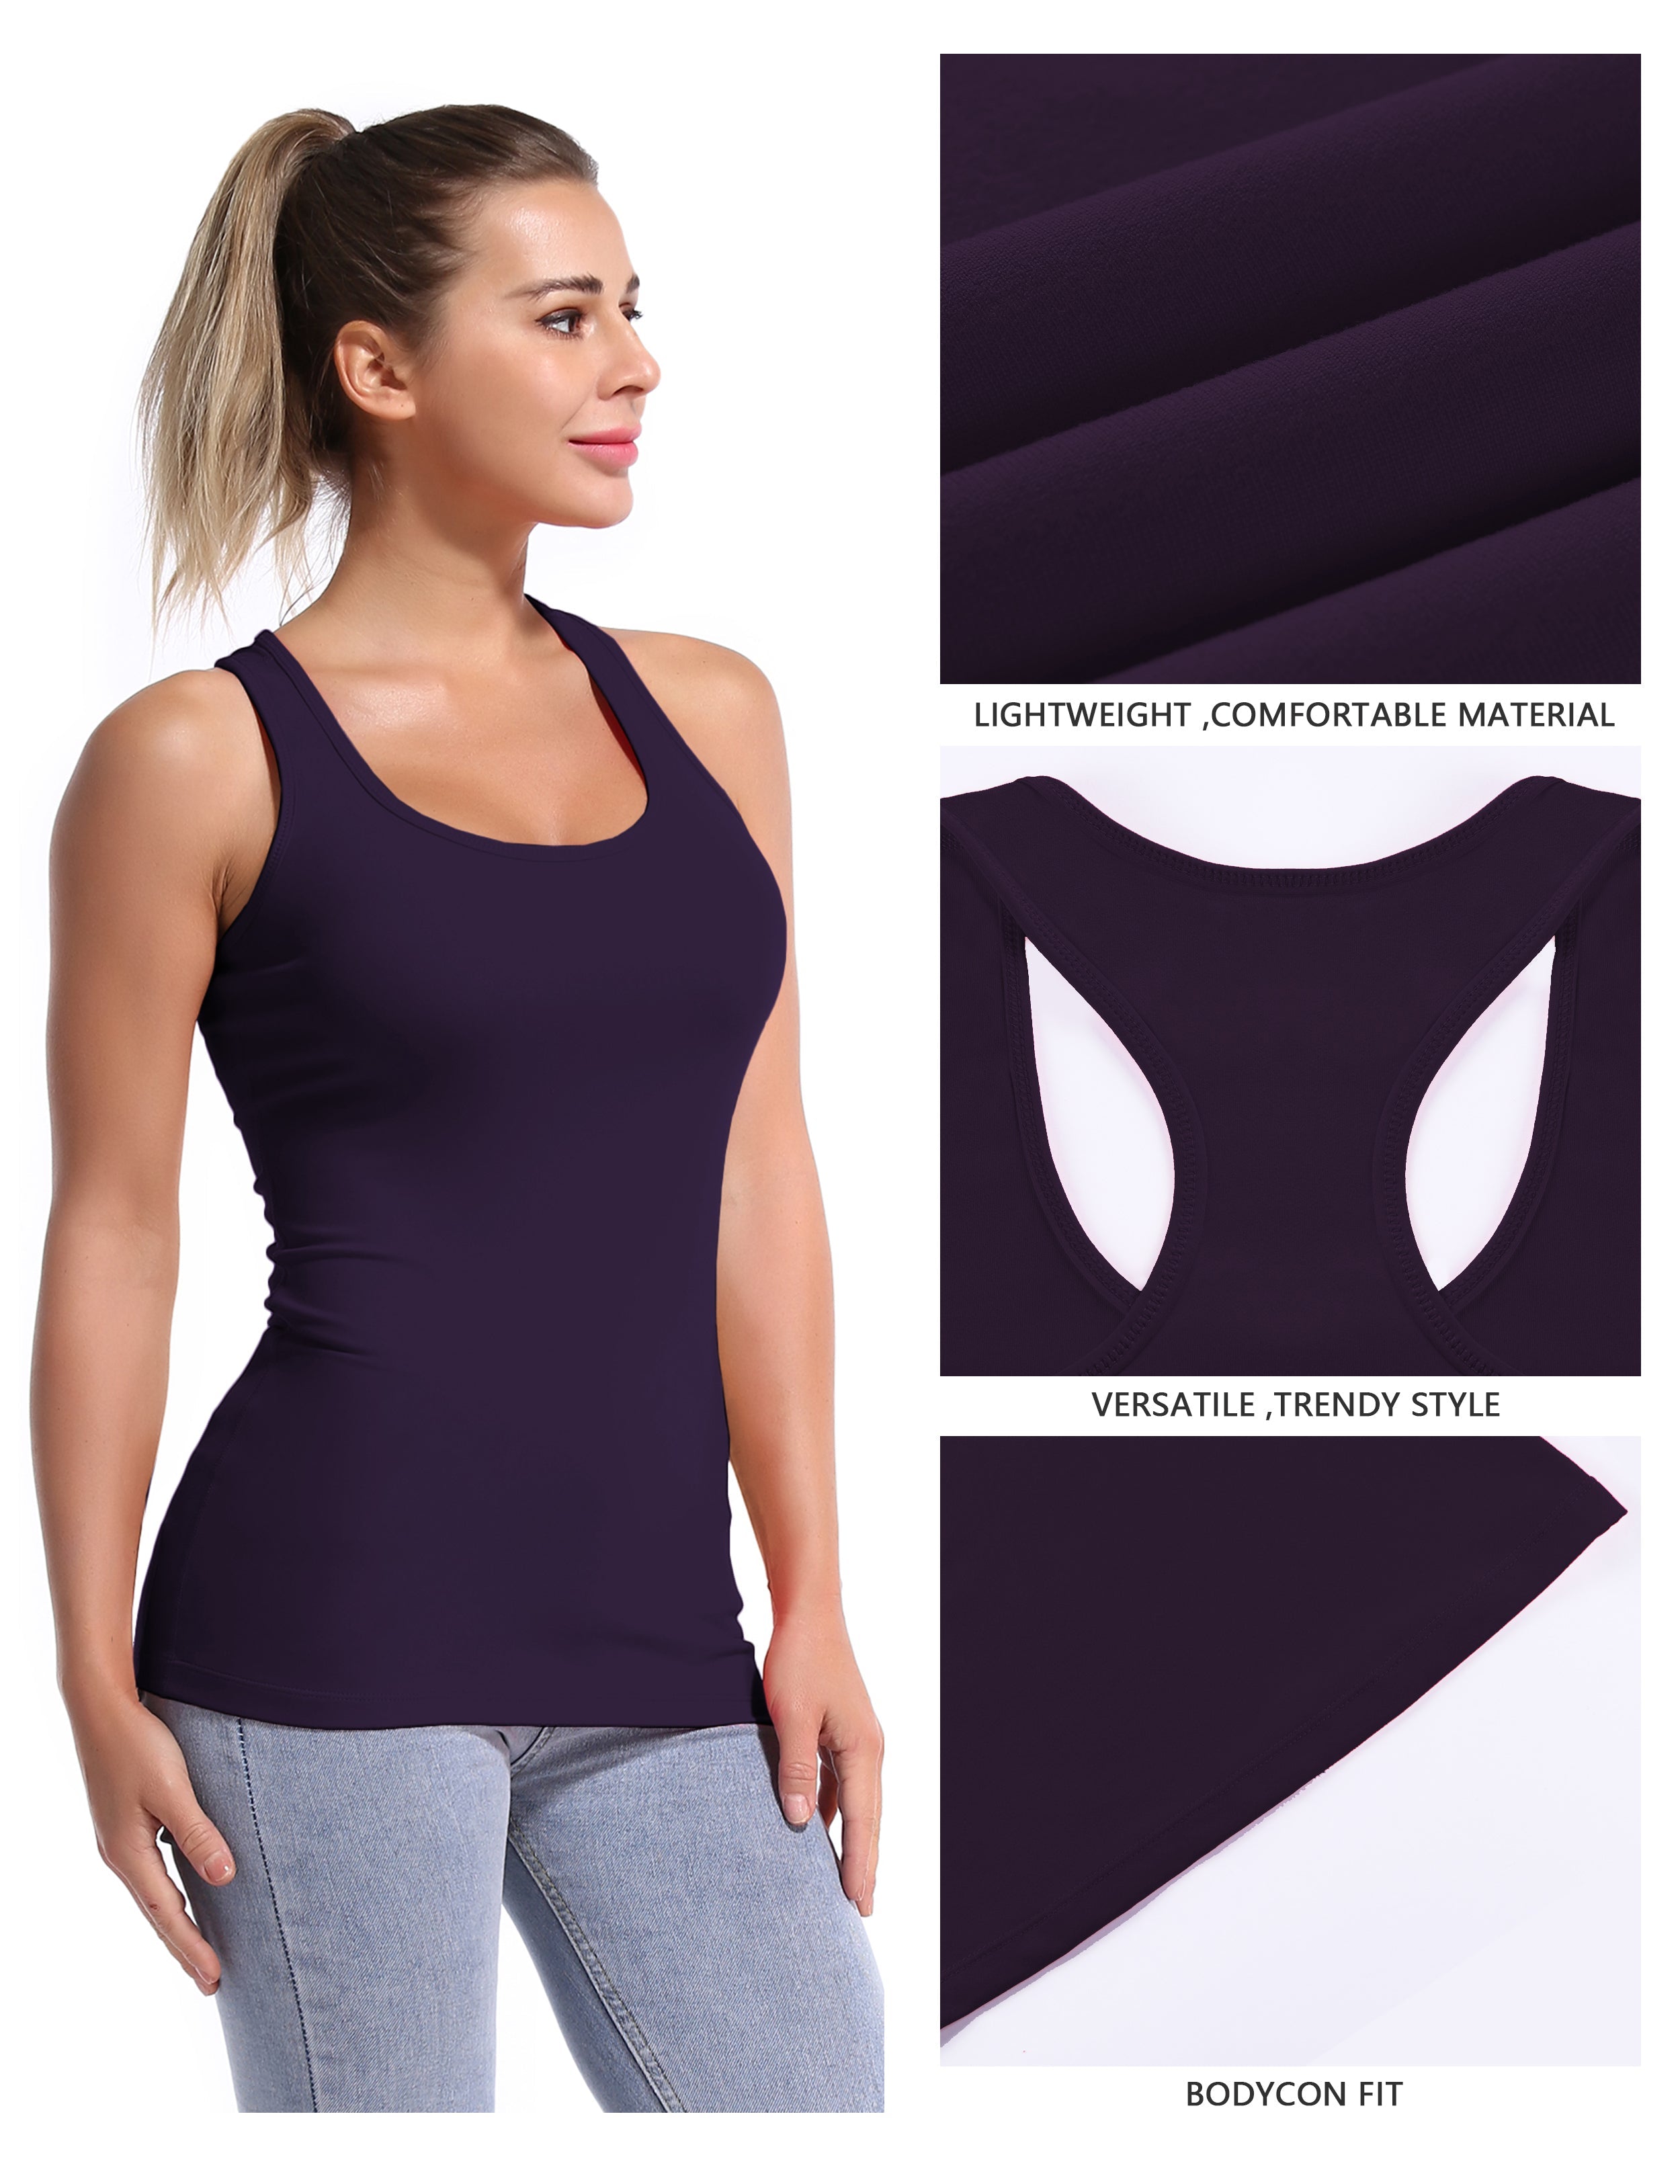 Racerback Athletic Tank Tops midnightblue 92%Nylon/8%Spandex(Cotton Soft) Designed for Gym Tight Fit So buttery soft, it feels weightless Sweat-wicking Four-way stretch Breathable Contours your body Sits below the waistband for moderate, everyday coverage